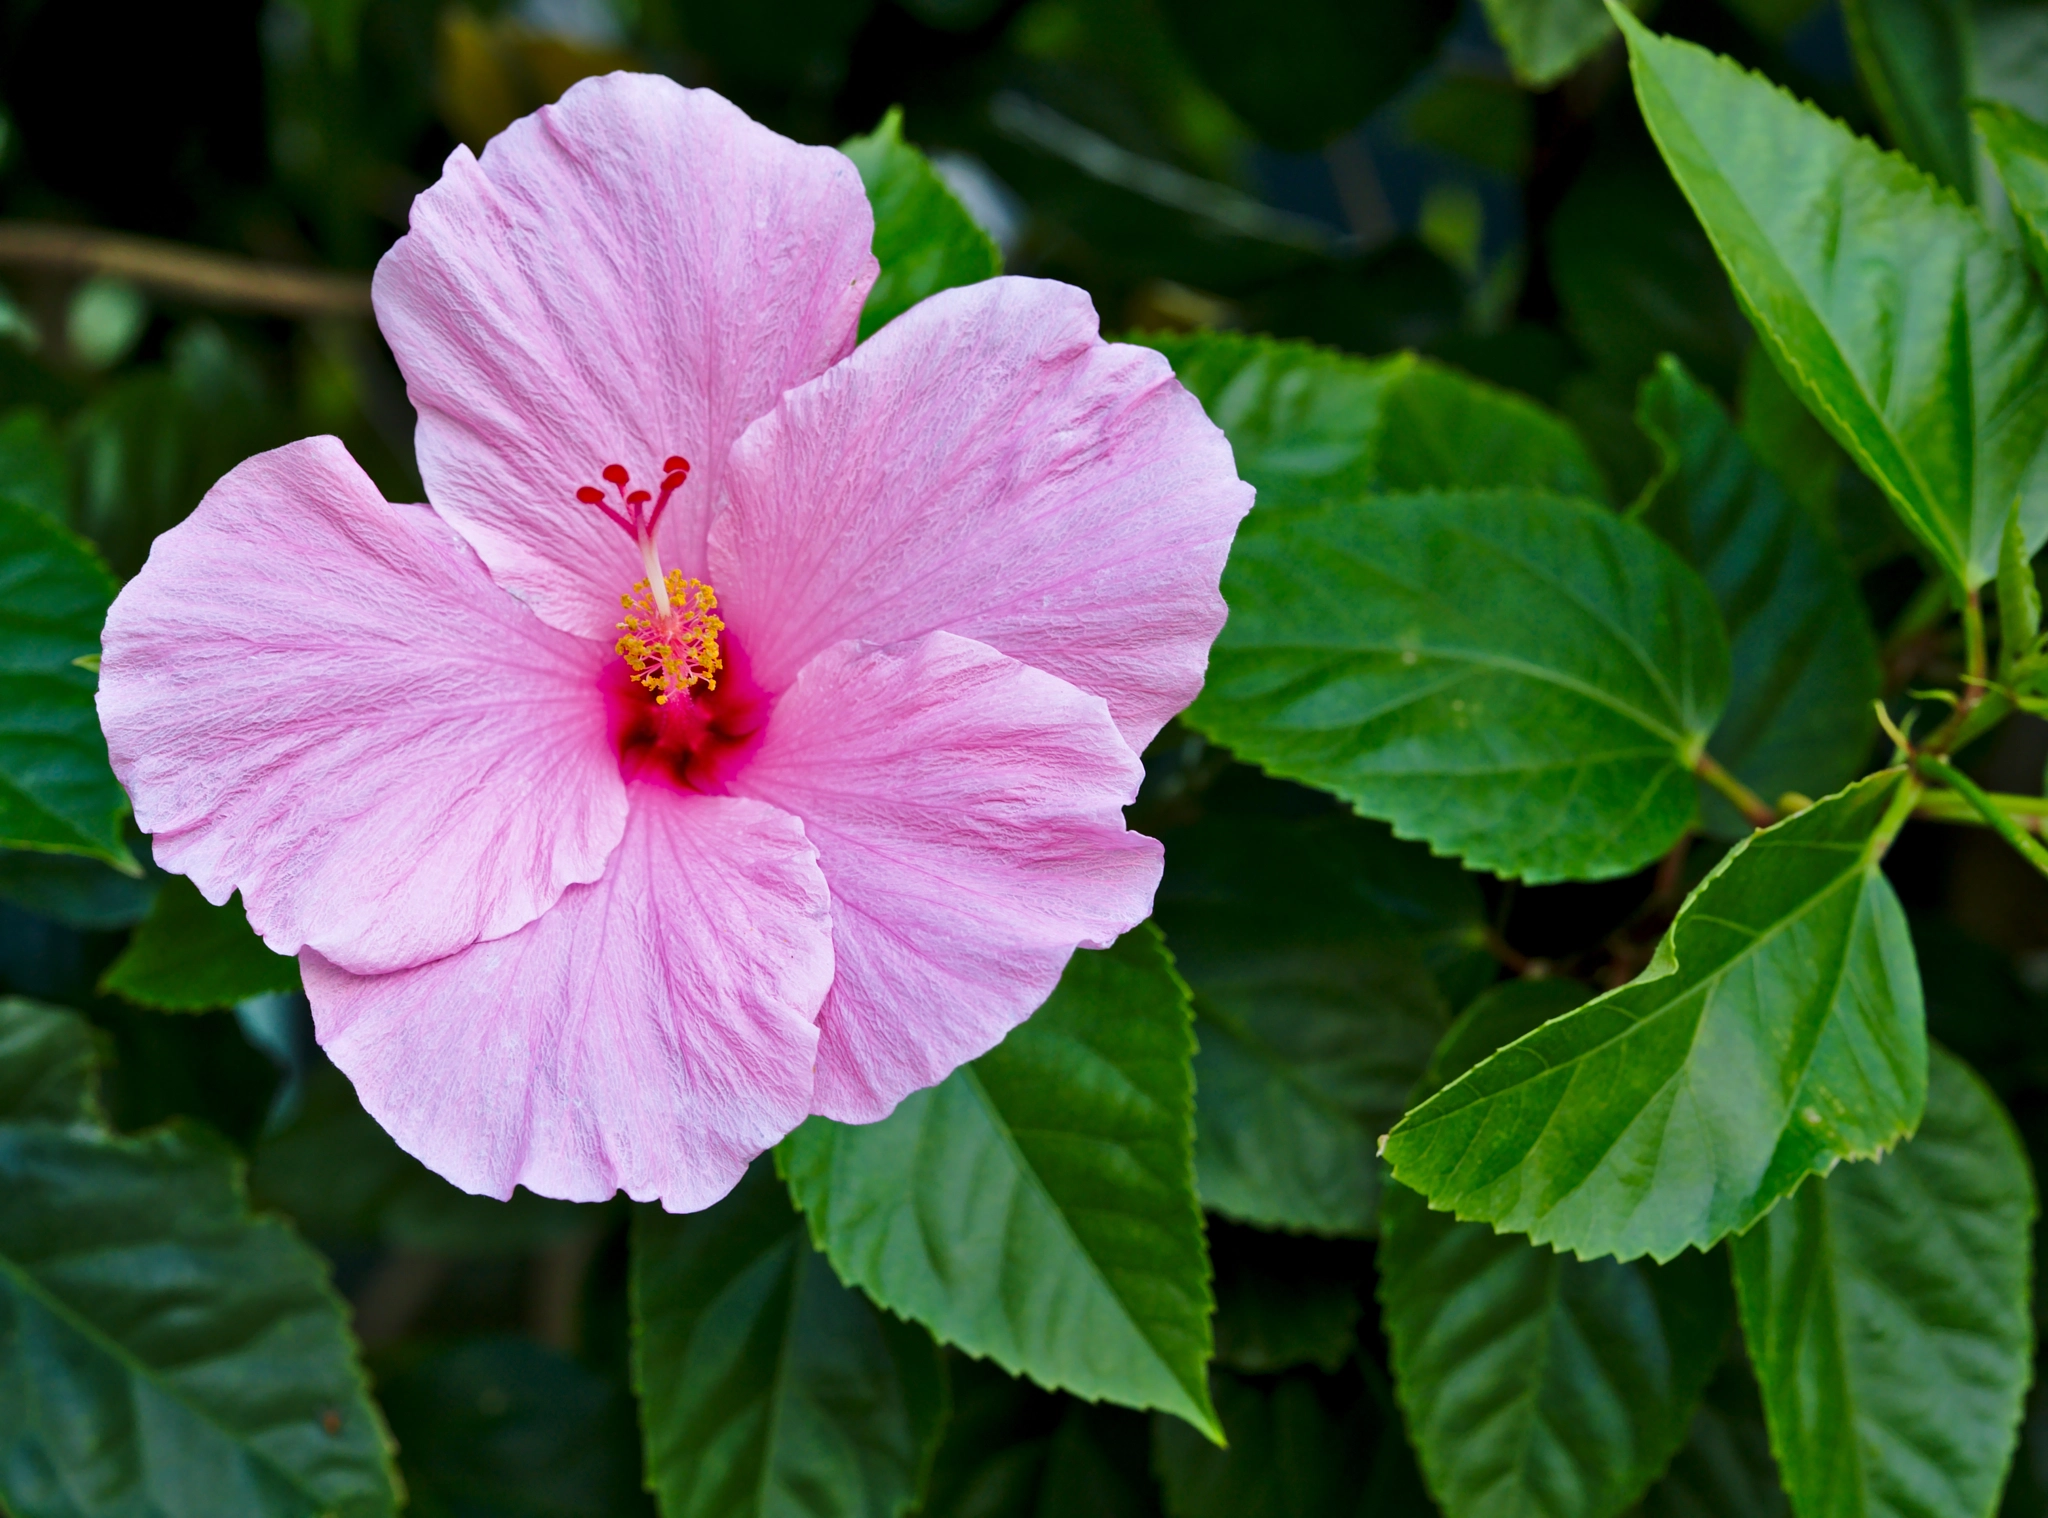 ZEISS Otus 85mm F1.4 sample photo. A pink hibiscus photography